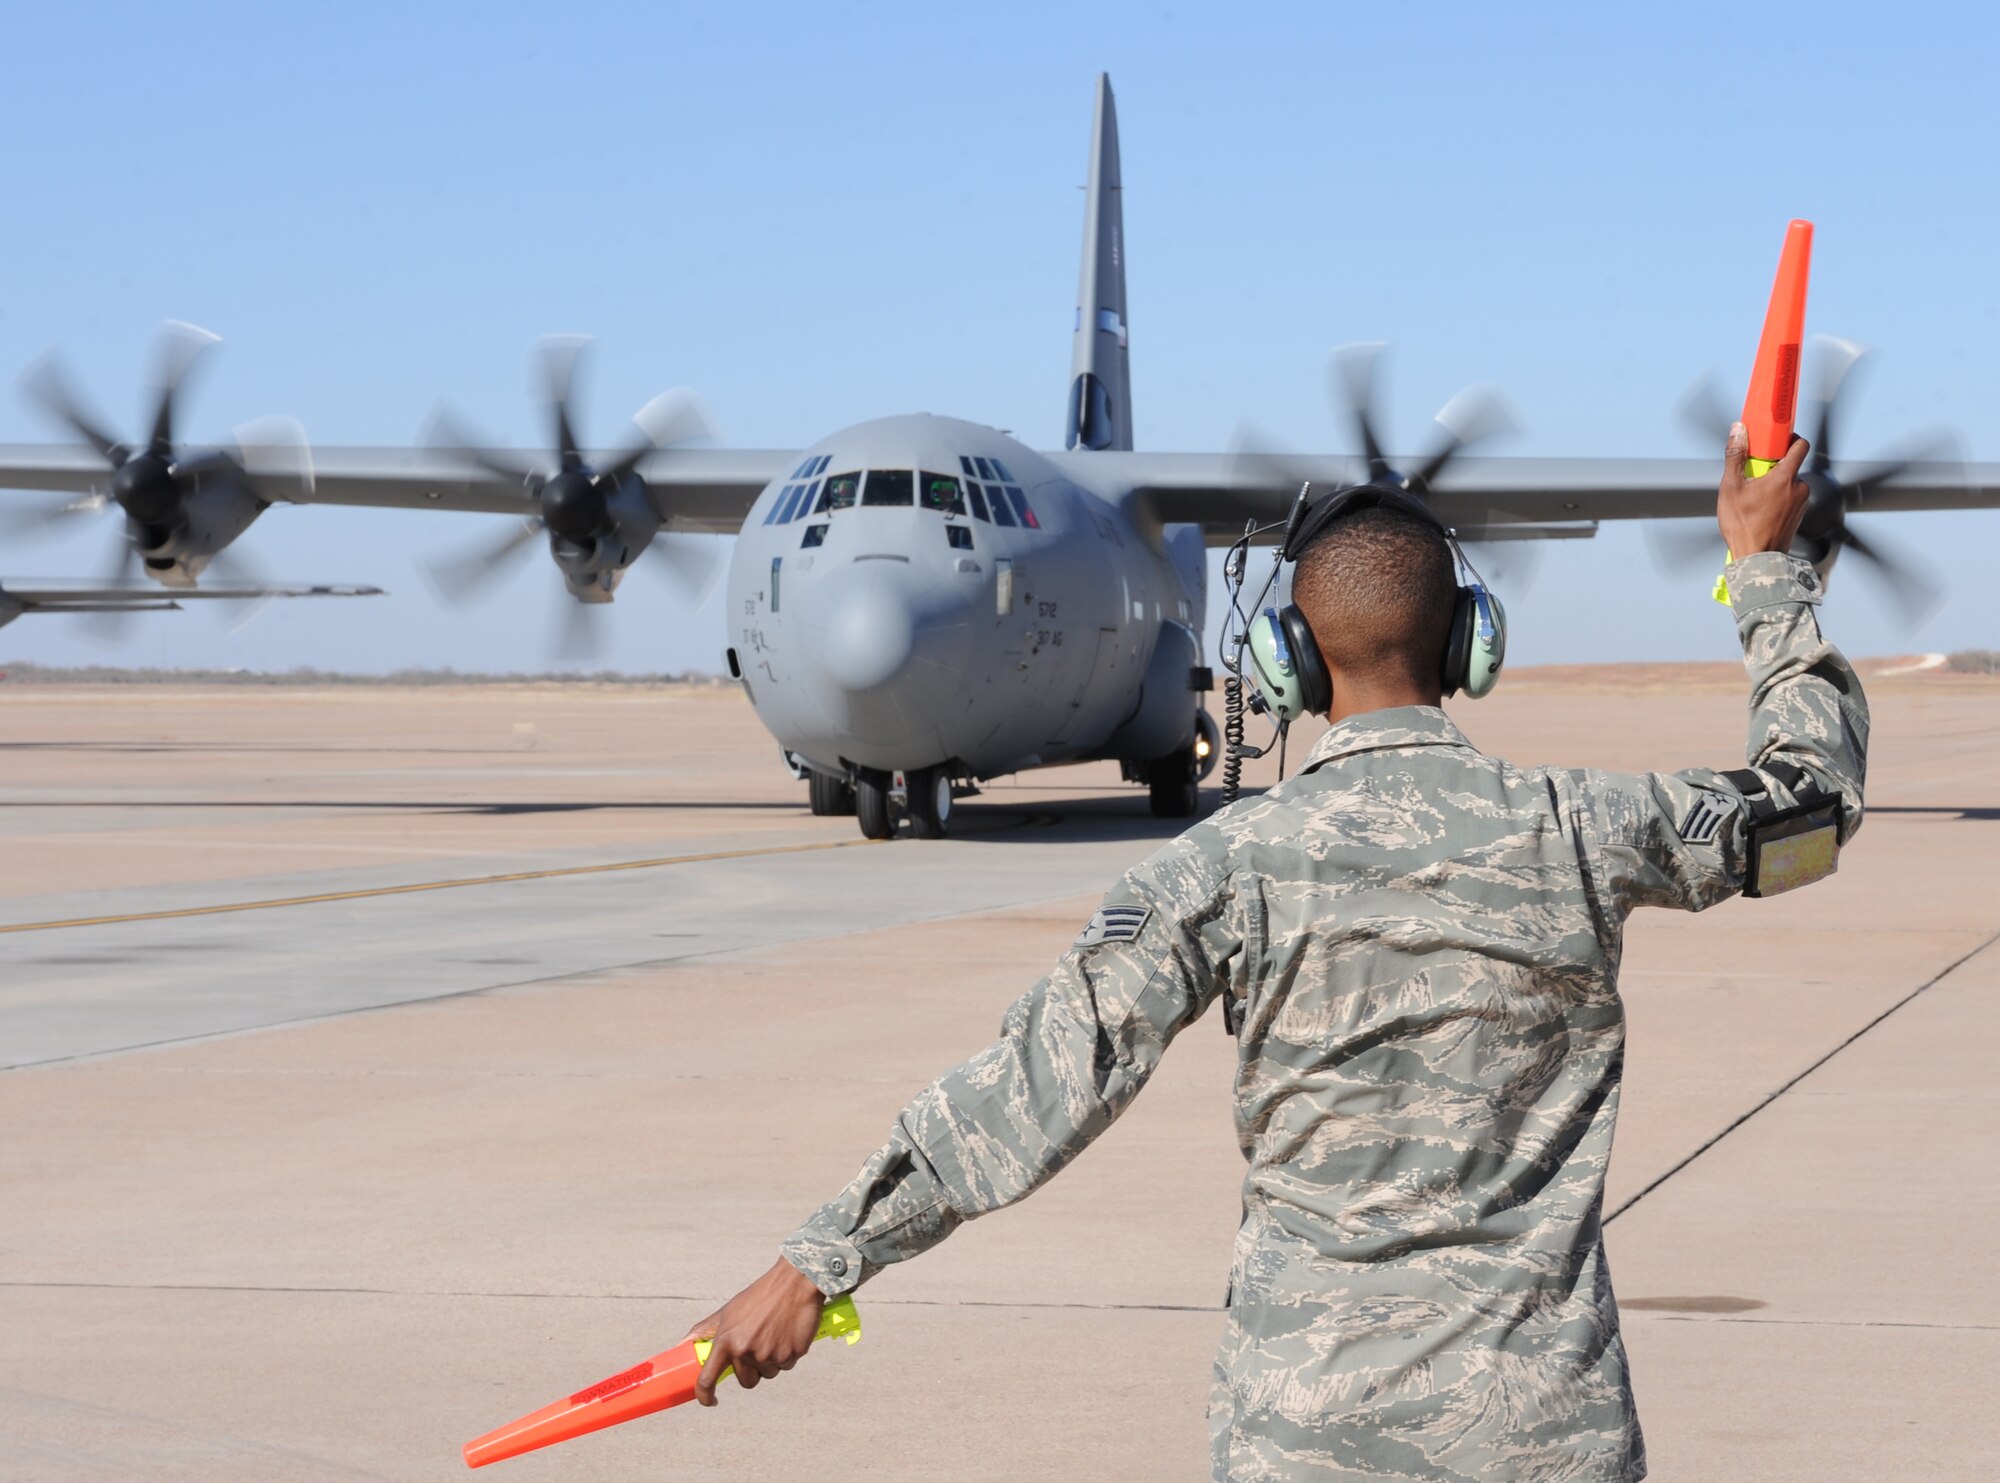 U.S. Air Force Senior Airman Antonio White, 317th Aircraft Maintenance Squadron, marshals in the 317th Airlift Group’s newest C-130J Dec. 13, 2012, at Dyess Air Force Base, Texas. This is the 24th C-130J of 28 to be delivered to Dyess by 2013, replacing the legacy fleet of C-130Hs. Once the final aircraft is delivered, Dyess will be home to the largest C-130J fleet in the world. (U.S. Air Force photo by Airman 1st Class Peter Thompson/Released) 